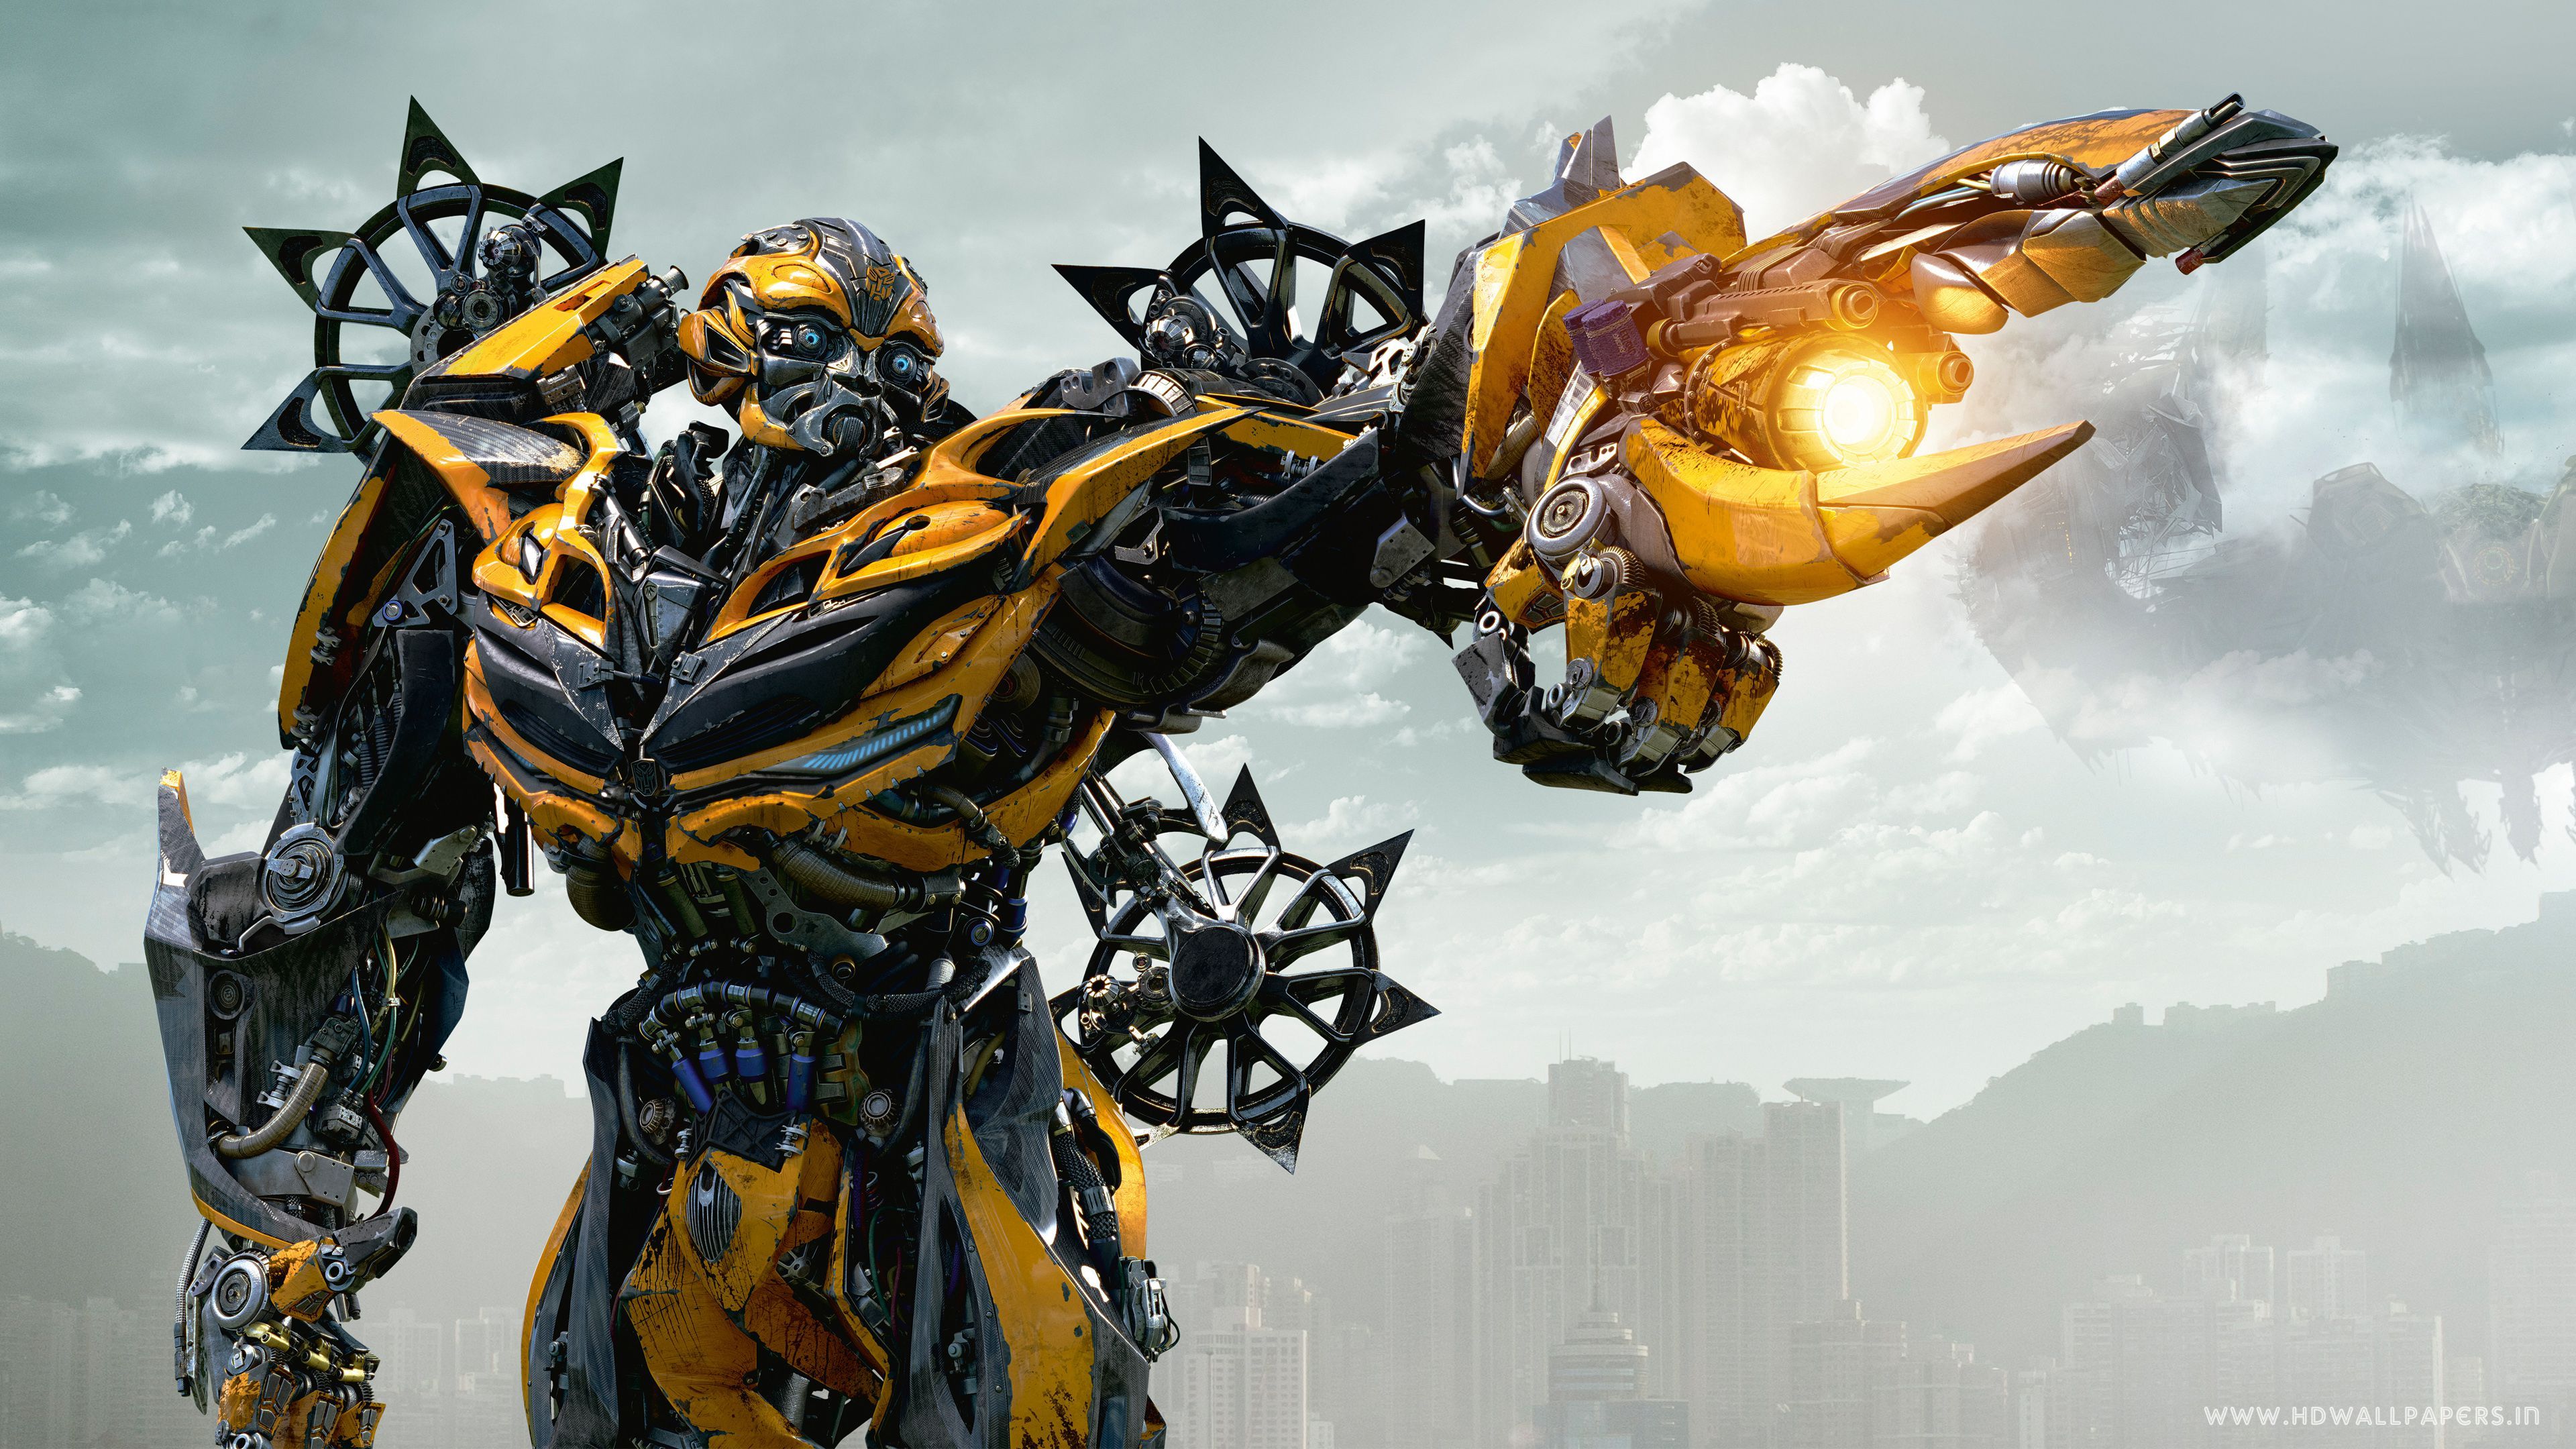 HD Wallpaper Of Bumblebee Autobot In Transformers Movie